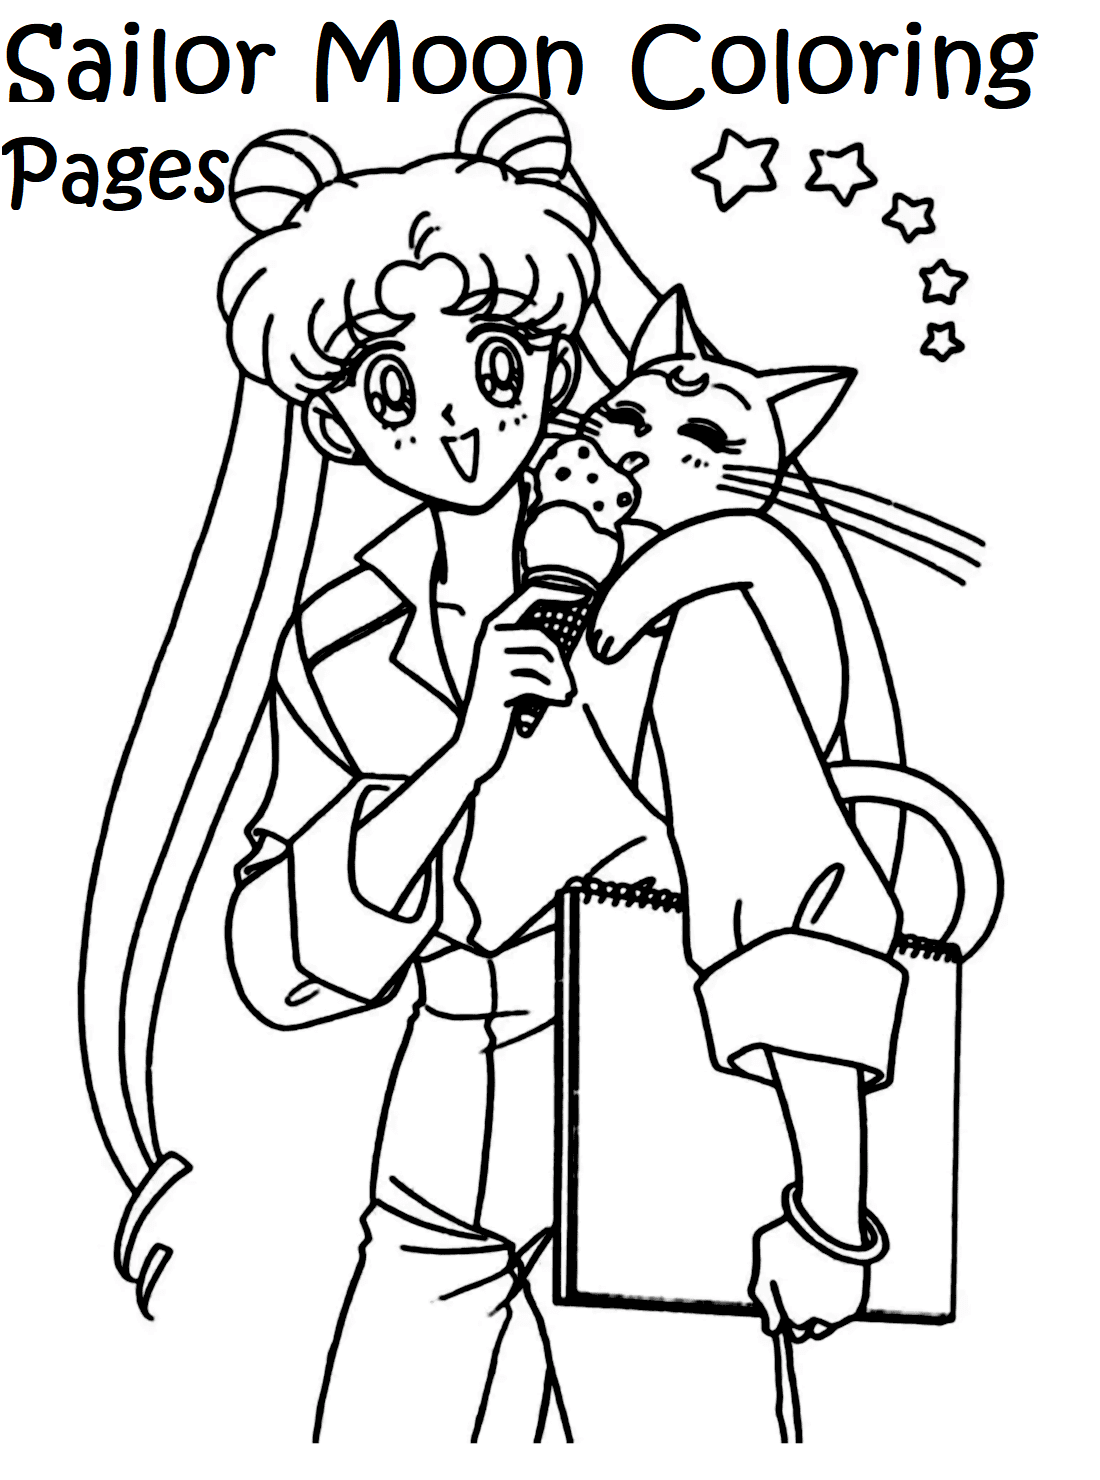 Sailor Moon Coloring Pages Online Free For Kids